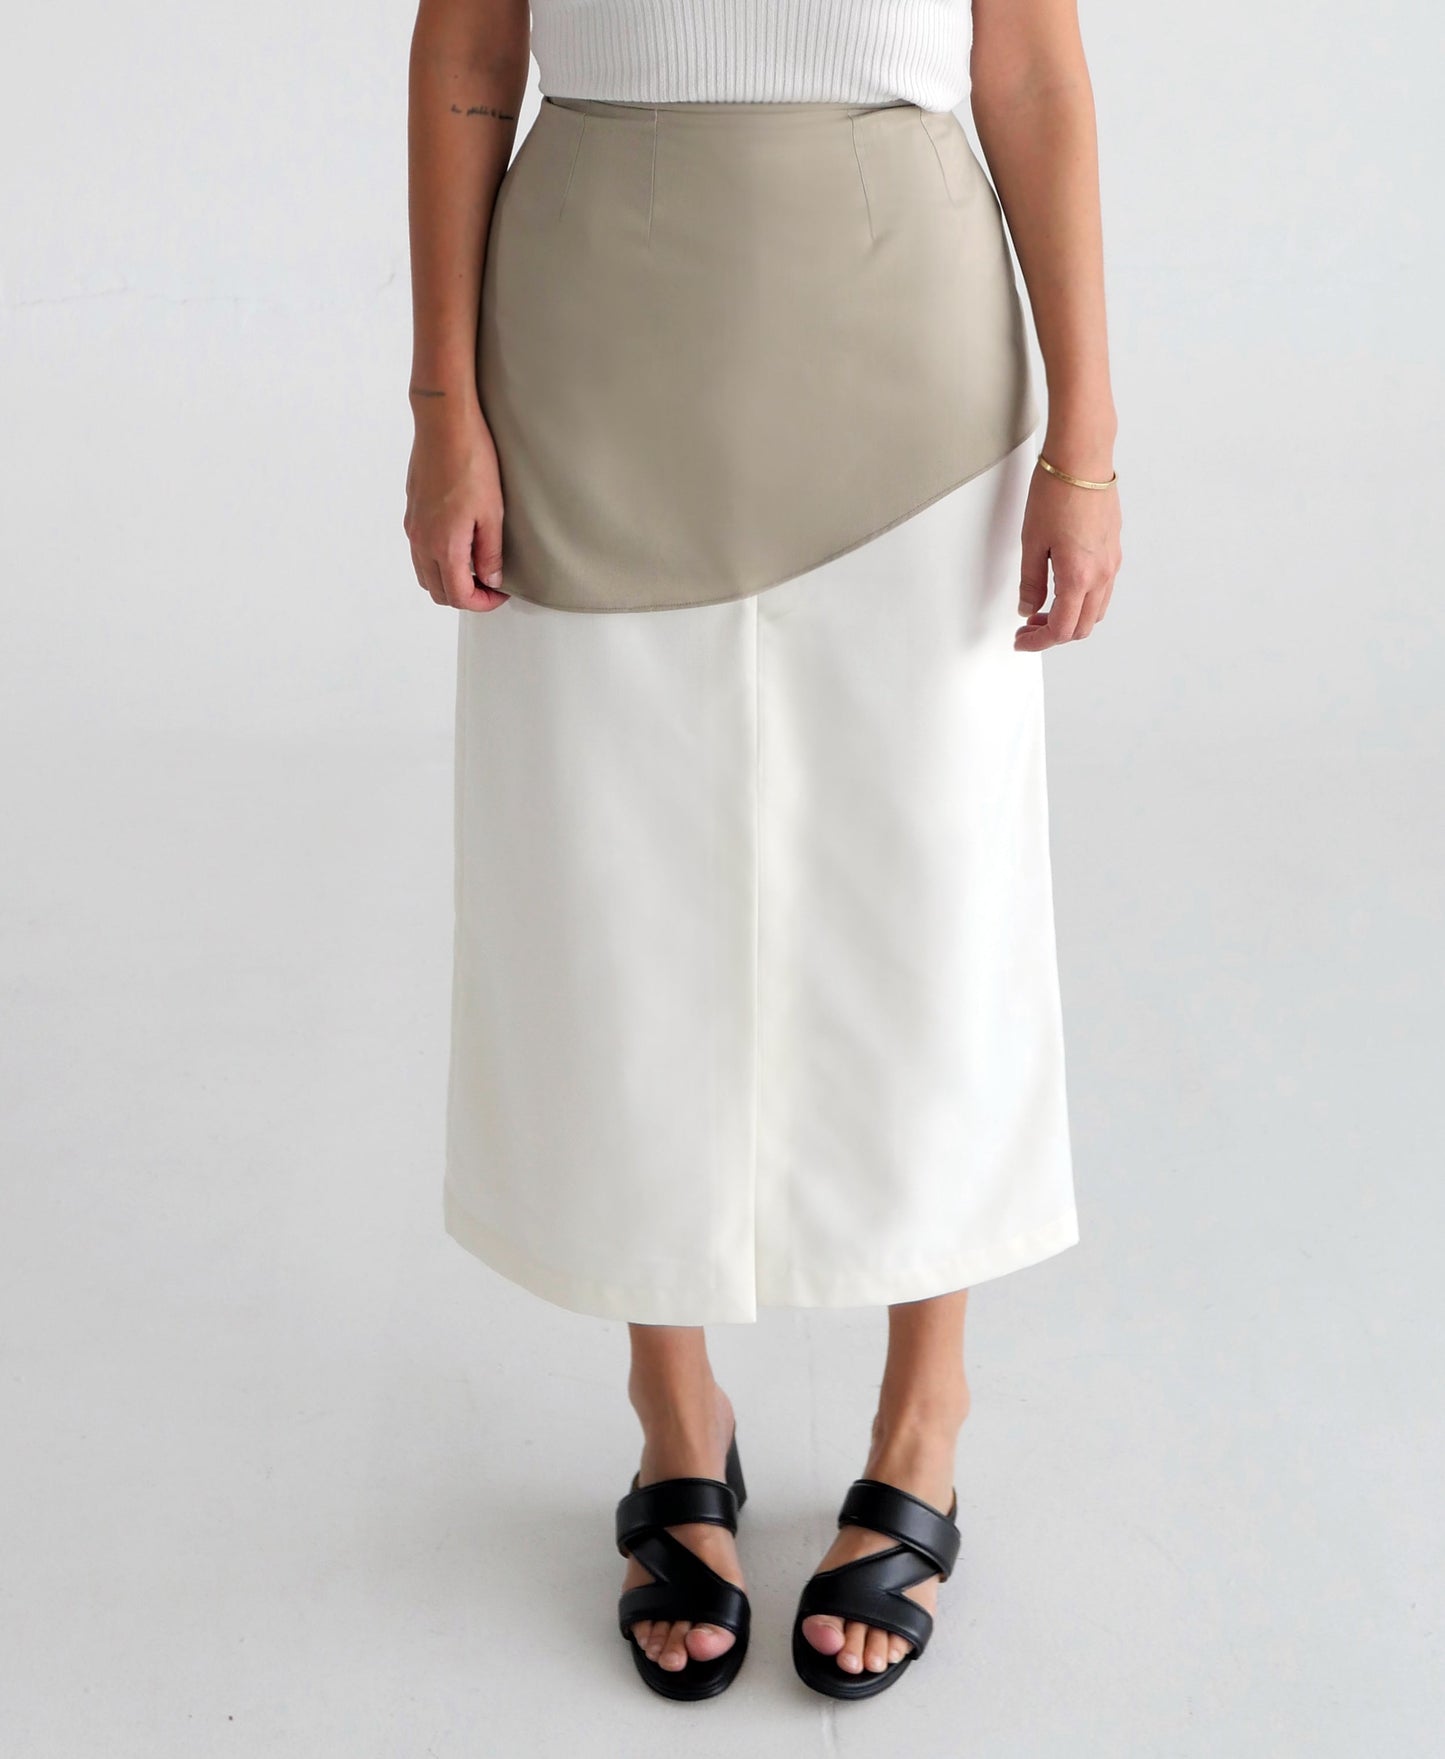 The Wave Skirt